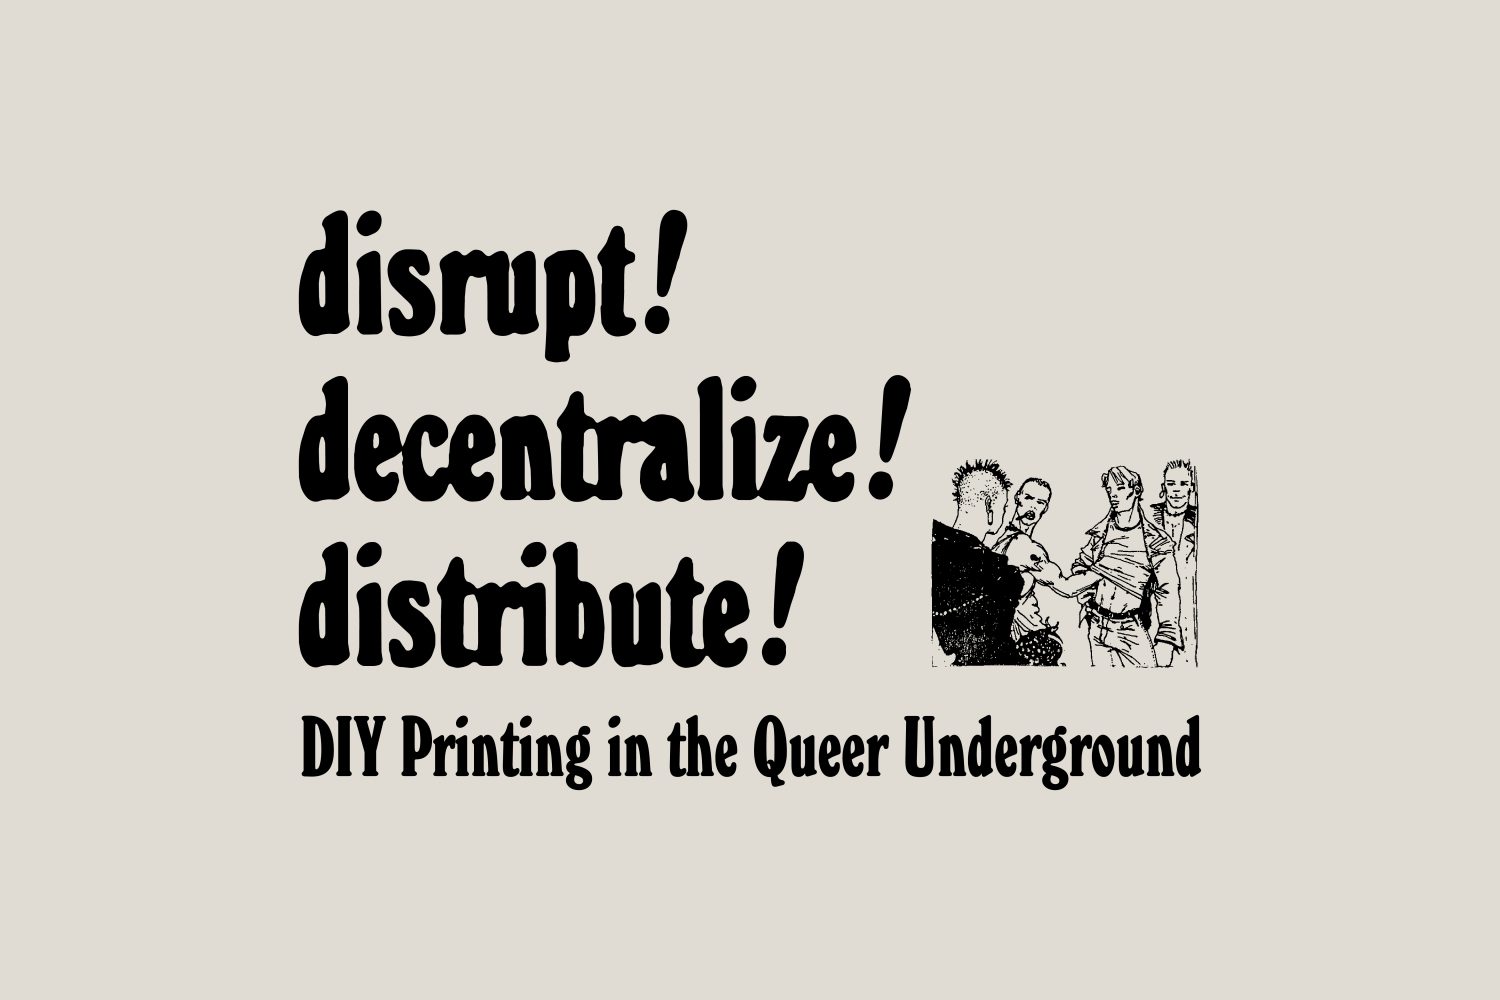 disrupt! decentralize! distribute! DIY Printing in the Queer Underground and line illustration of four people